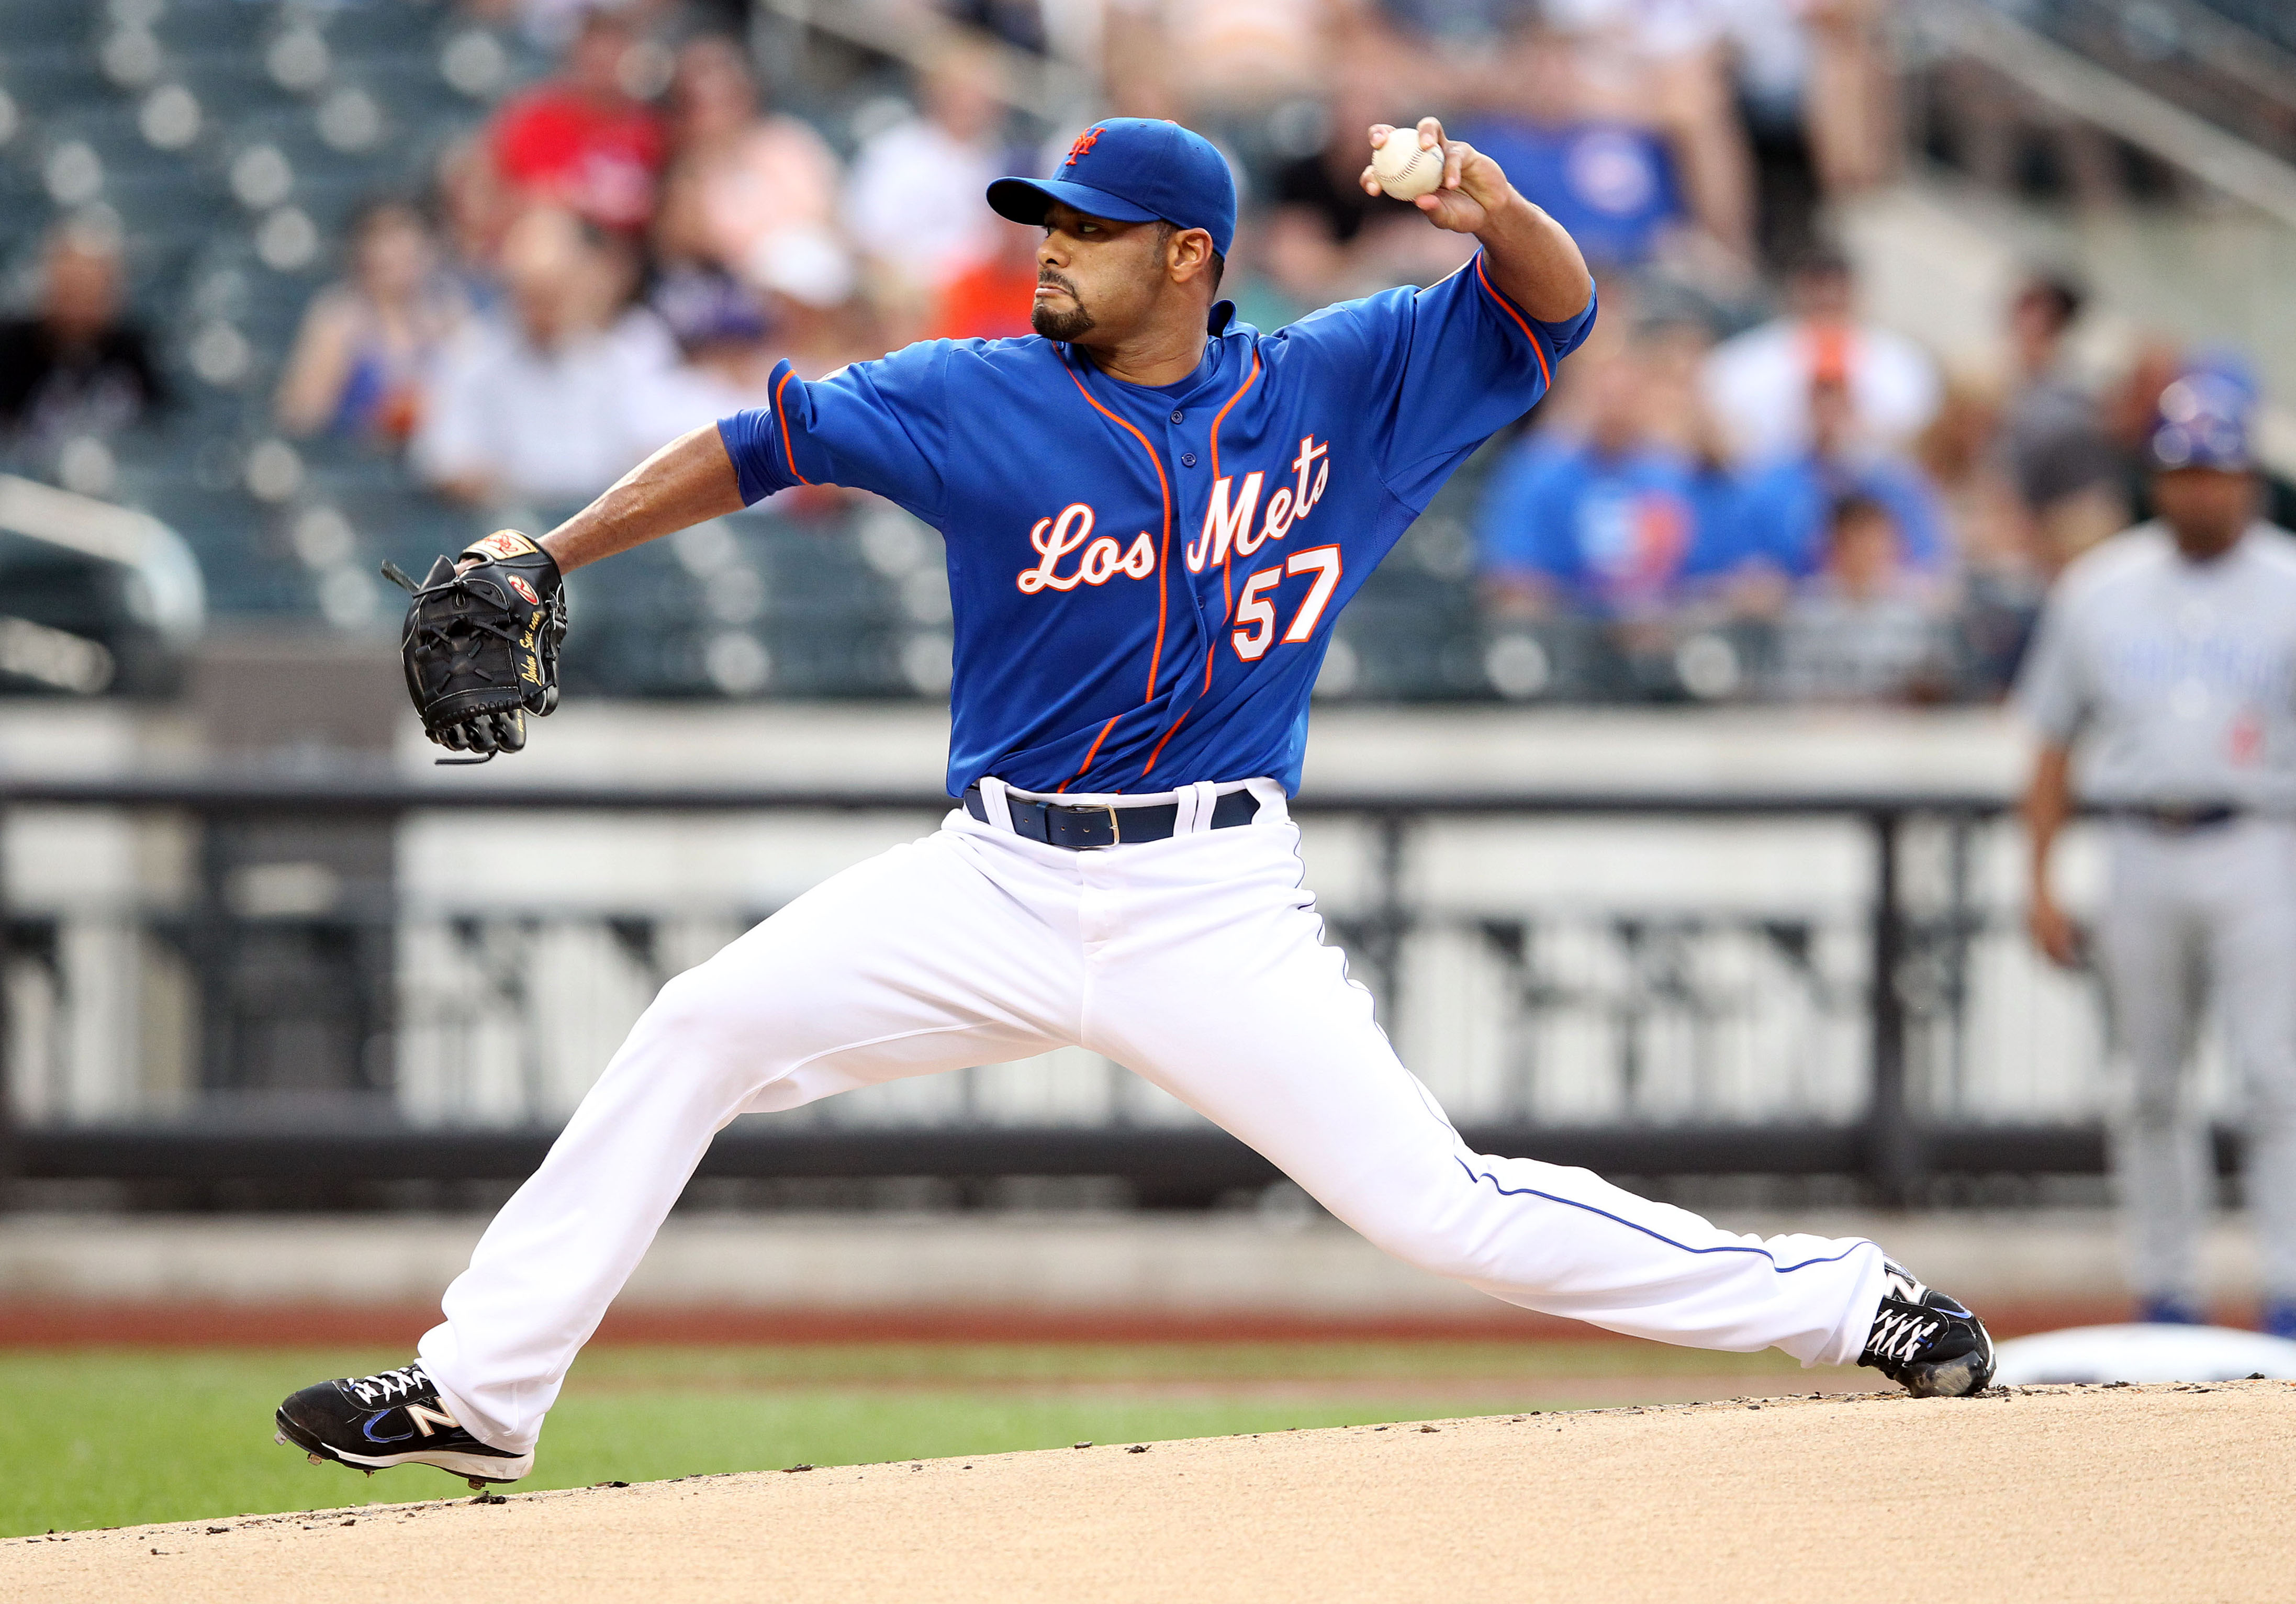 OTD in 2012, Johan Santana spun a 134-pitch no-hitter to the delight of  @mets fans everywhere. #LGM